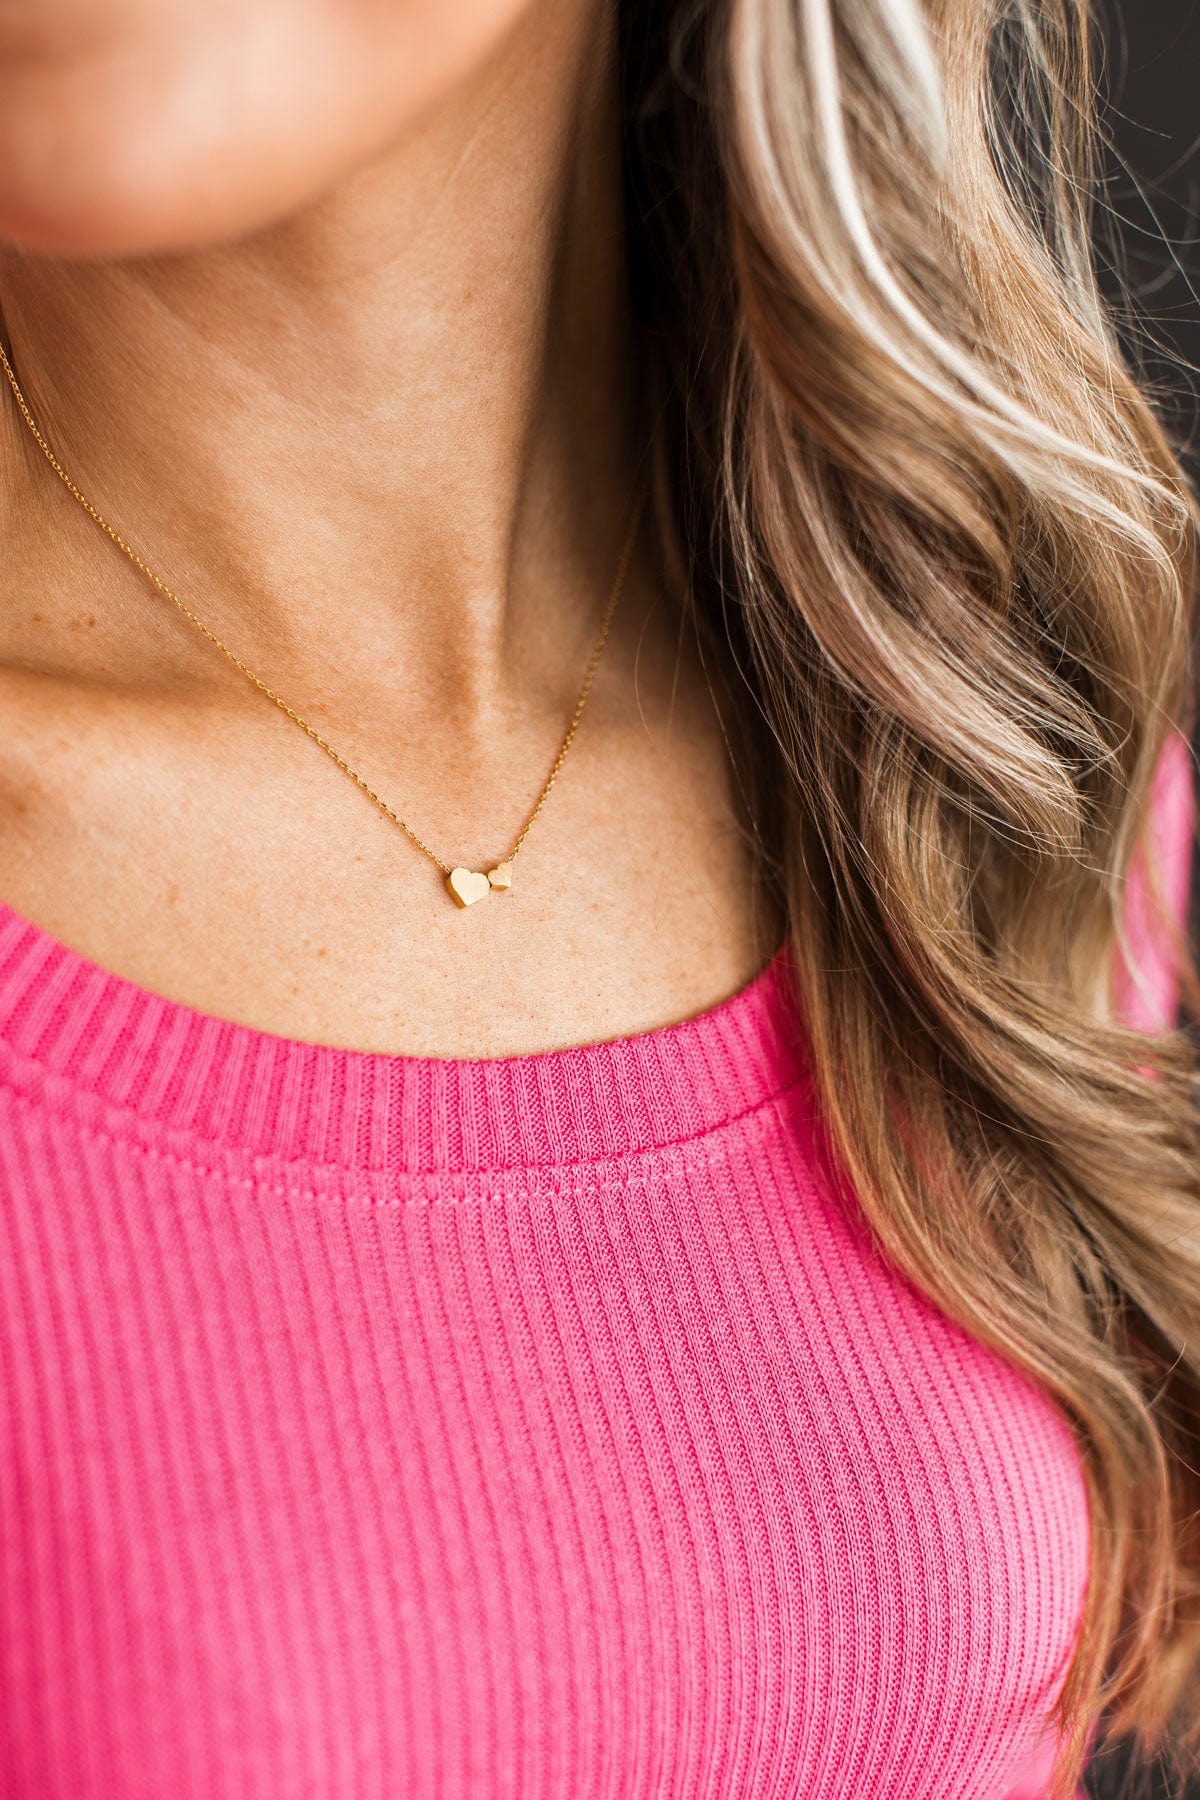 Loved By All Heart Necklace- Gold